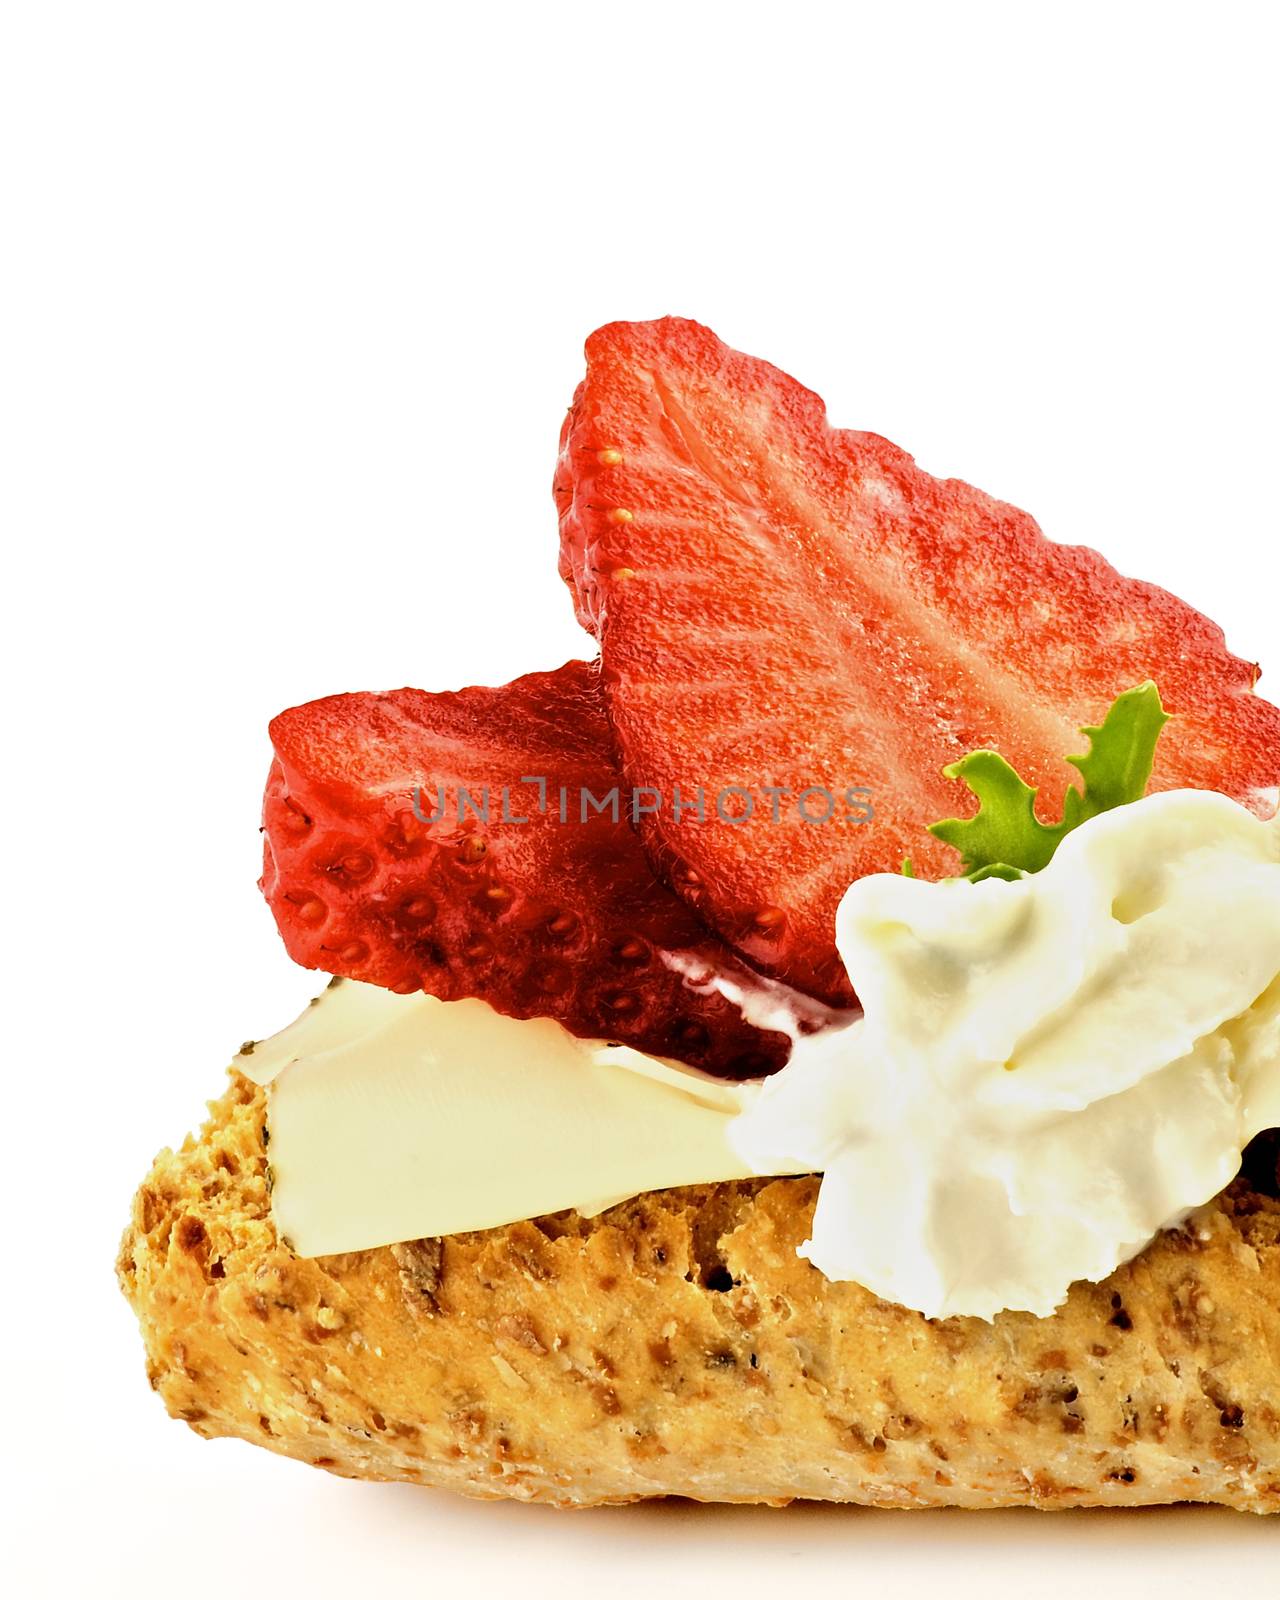 Cottage Cheese and Strawberry Sandwich by zhekos